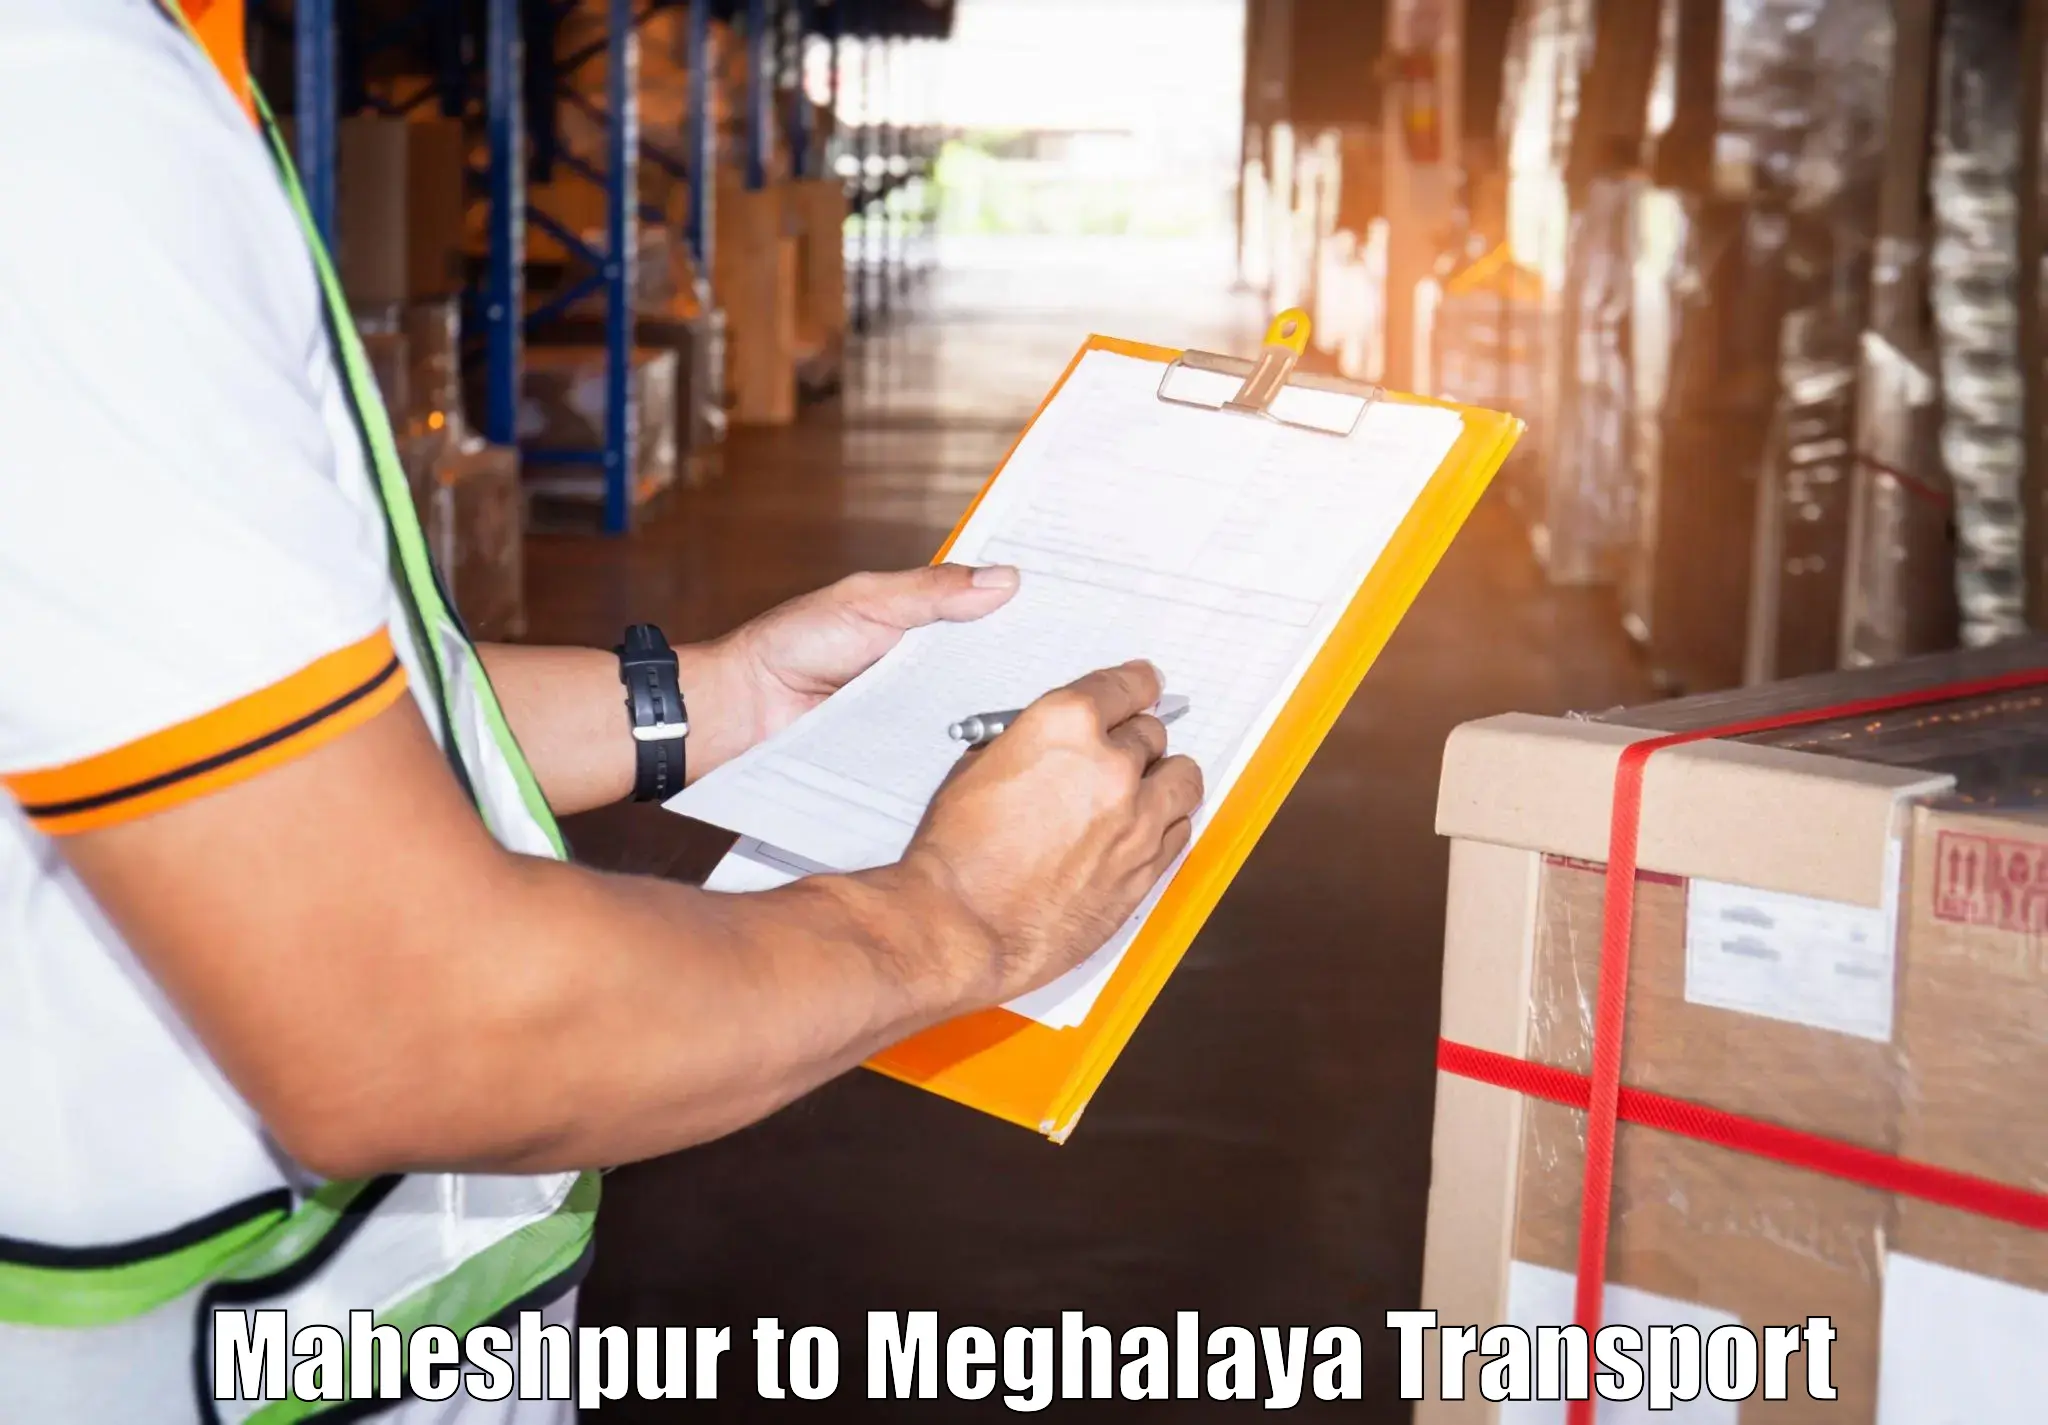 Cargo transport services in Maheshpur to Shillong